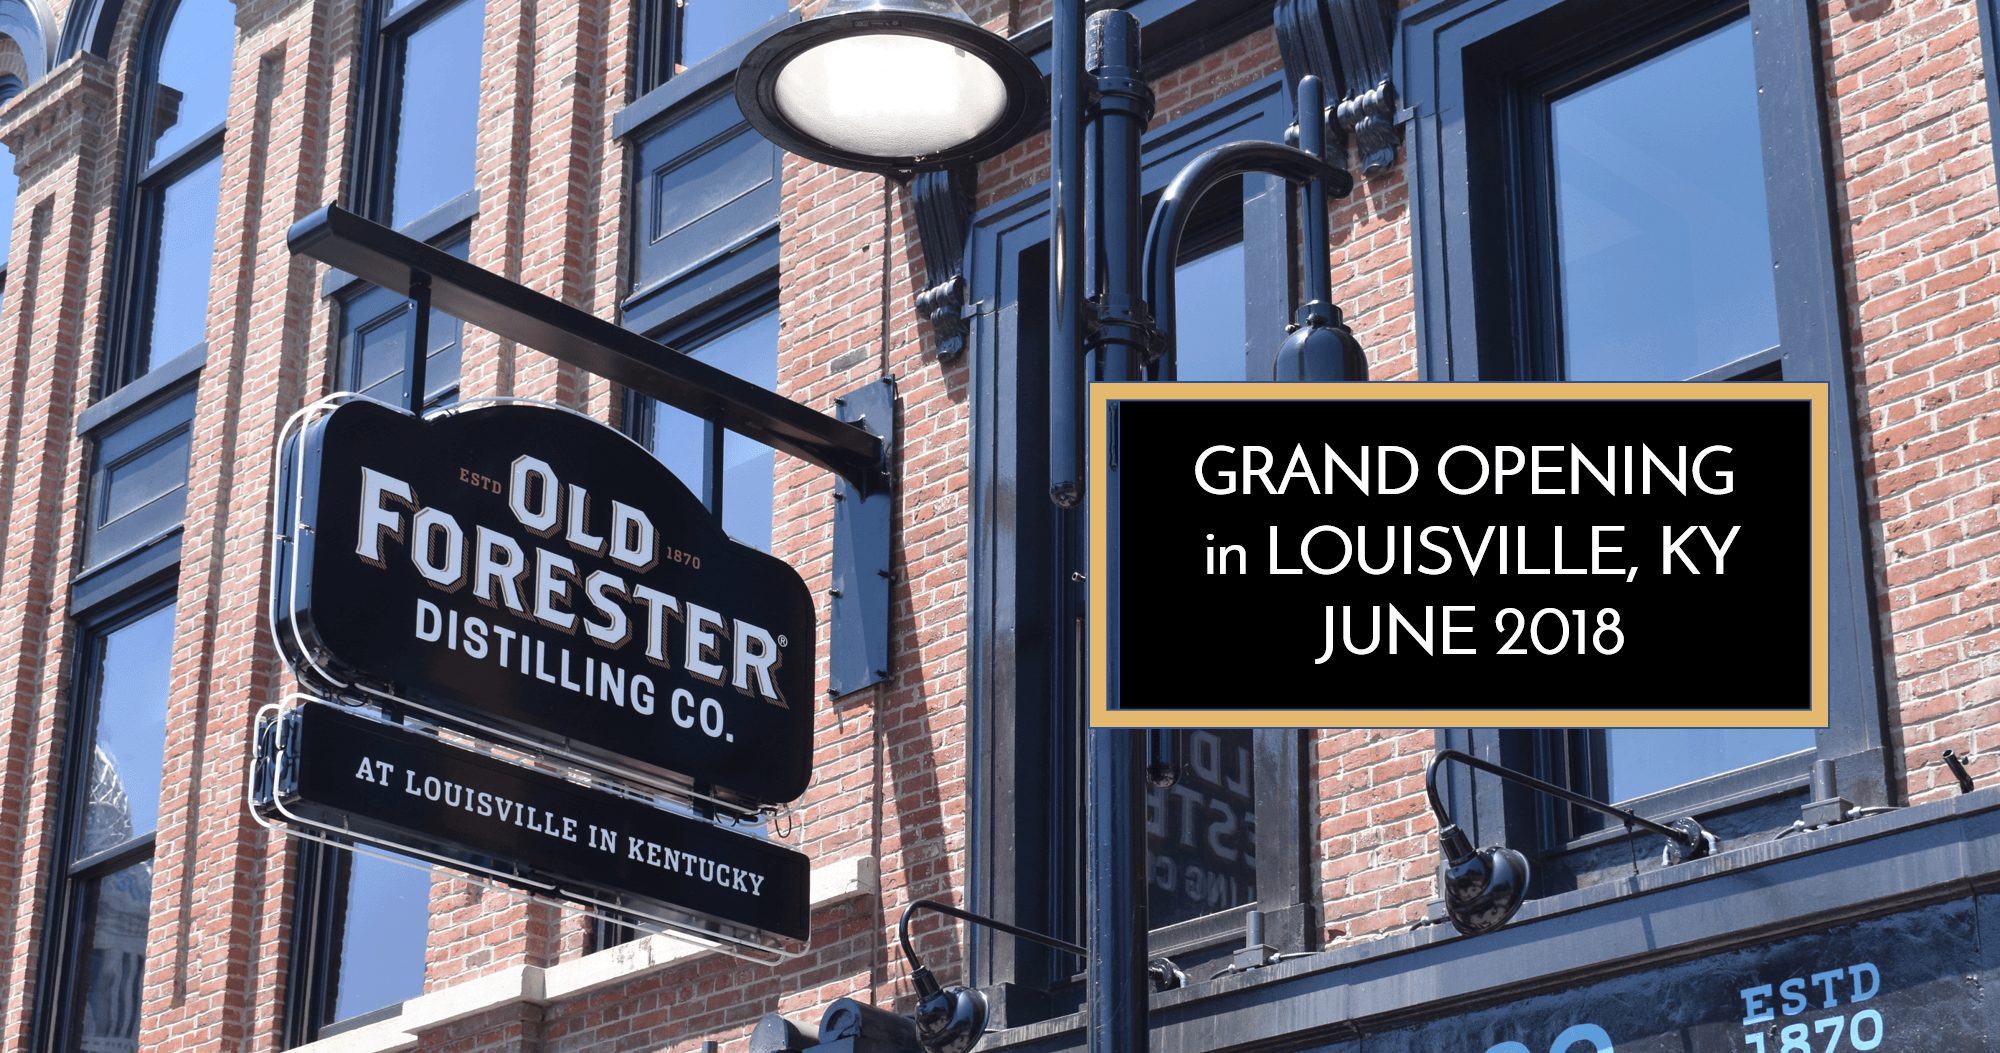 Old Forester distillery: Grand opening in Louisville,KY in June 2018, as if you were there!